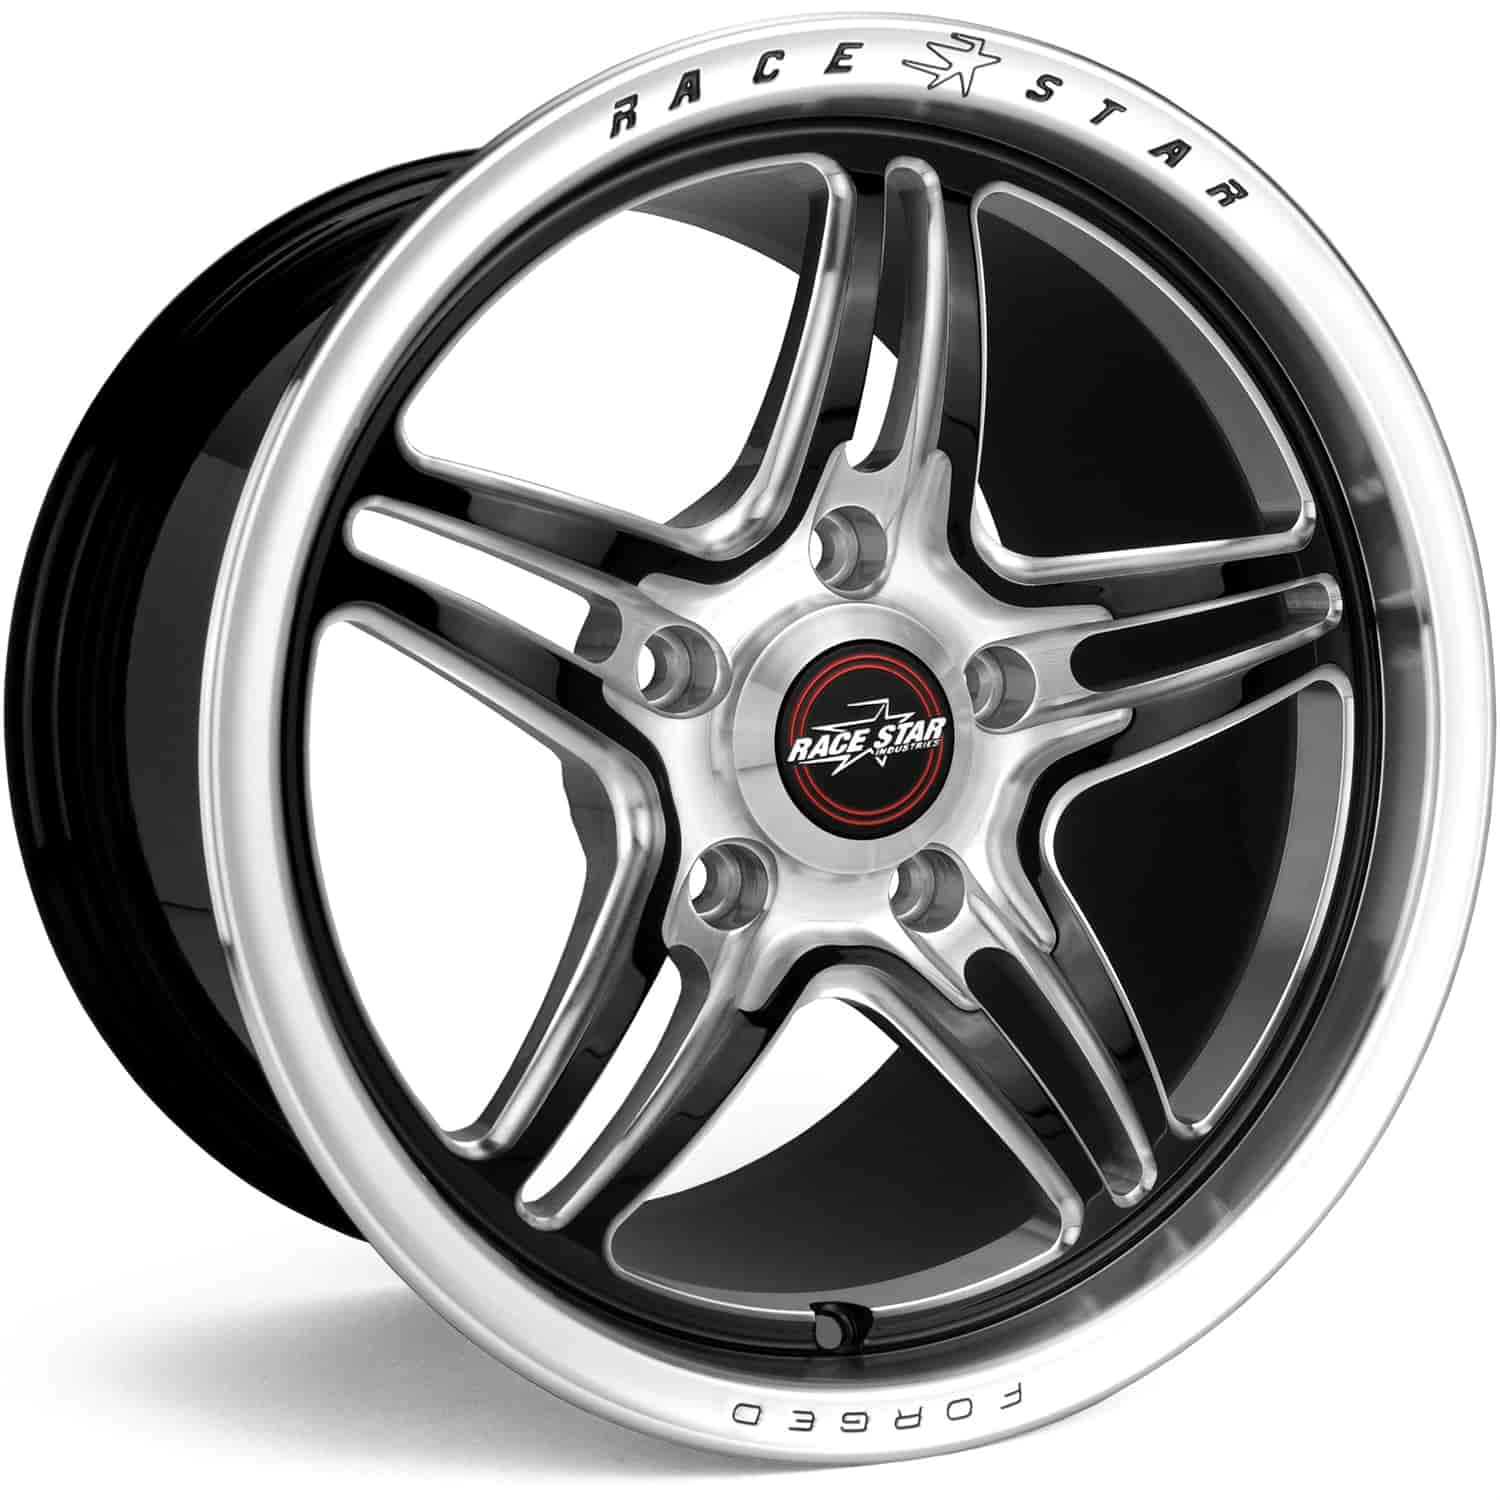 RSF-1 Forged Wheel Size: 17